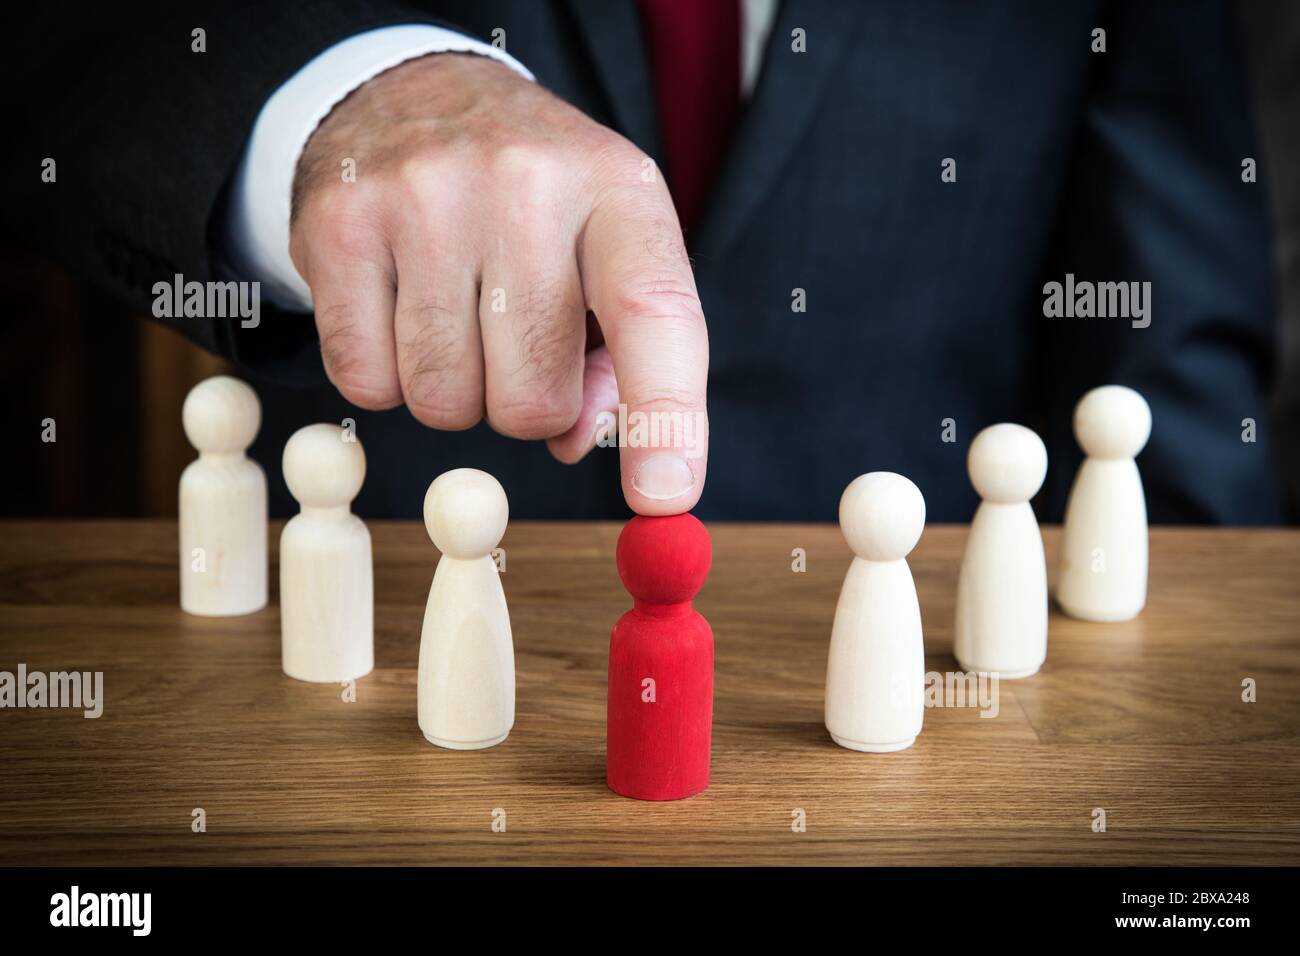 A businessman choosing or headhunting a team member for promotion to a leadership or management career position. Stock Photo